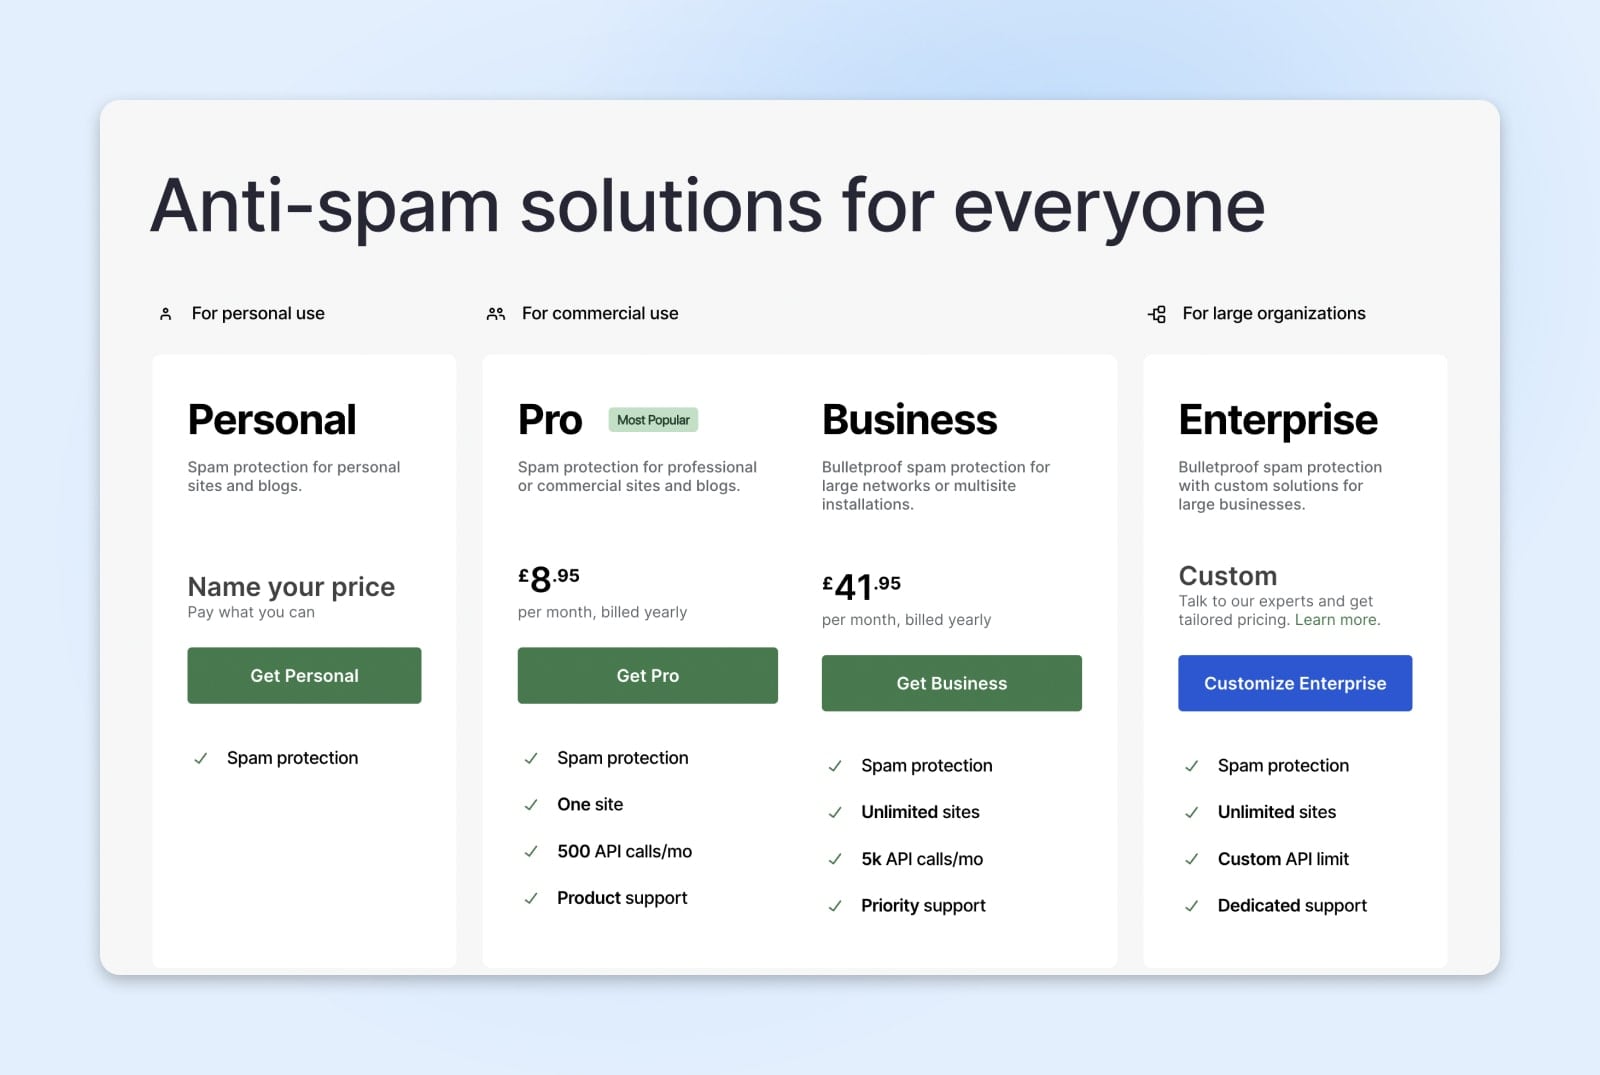 Akismet pricing plans in focus: "Anti-spam solutions for everyone."